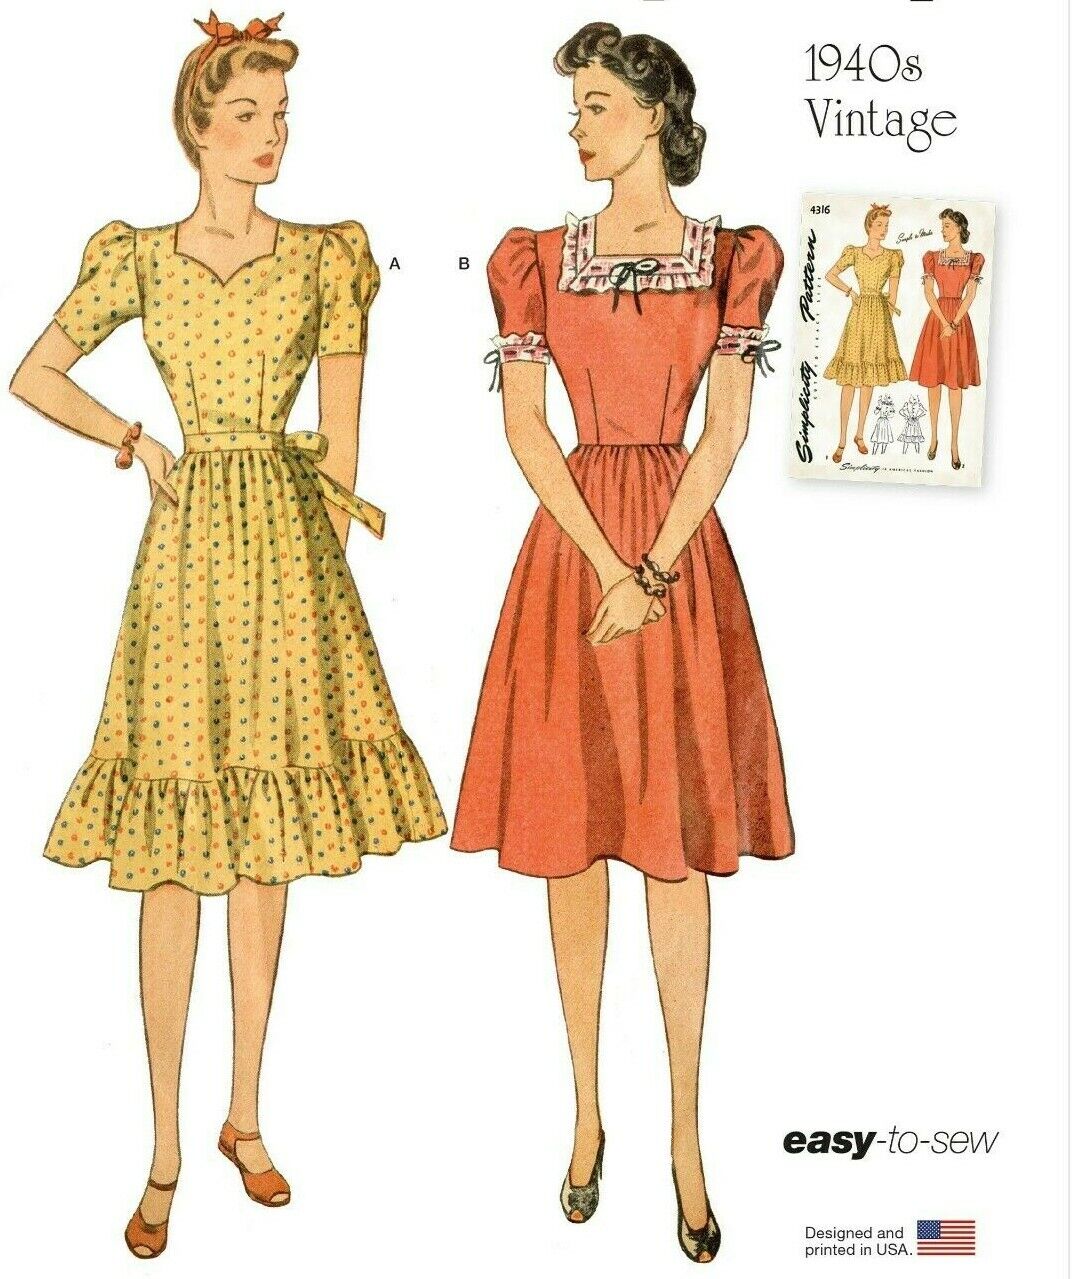 S9464 Sewing Pattern Simplicity 9464 VTG 1940s Dress EASY Size 6-14 39363594642